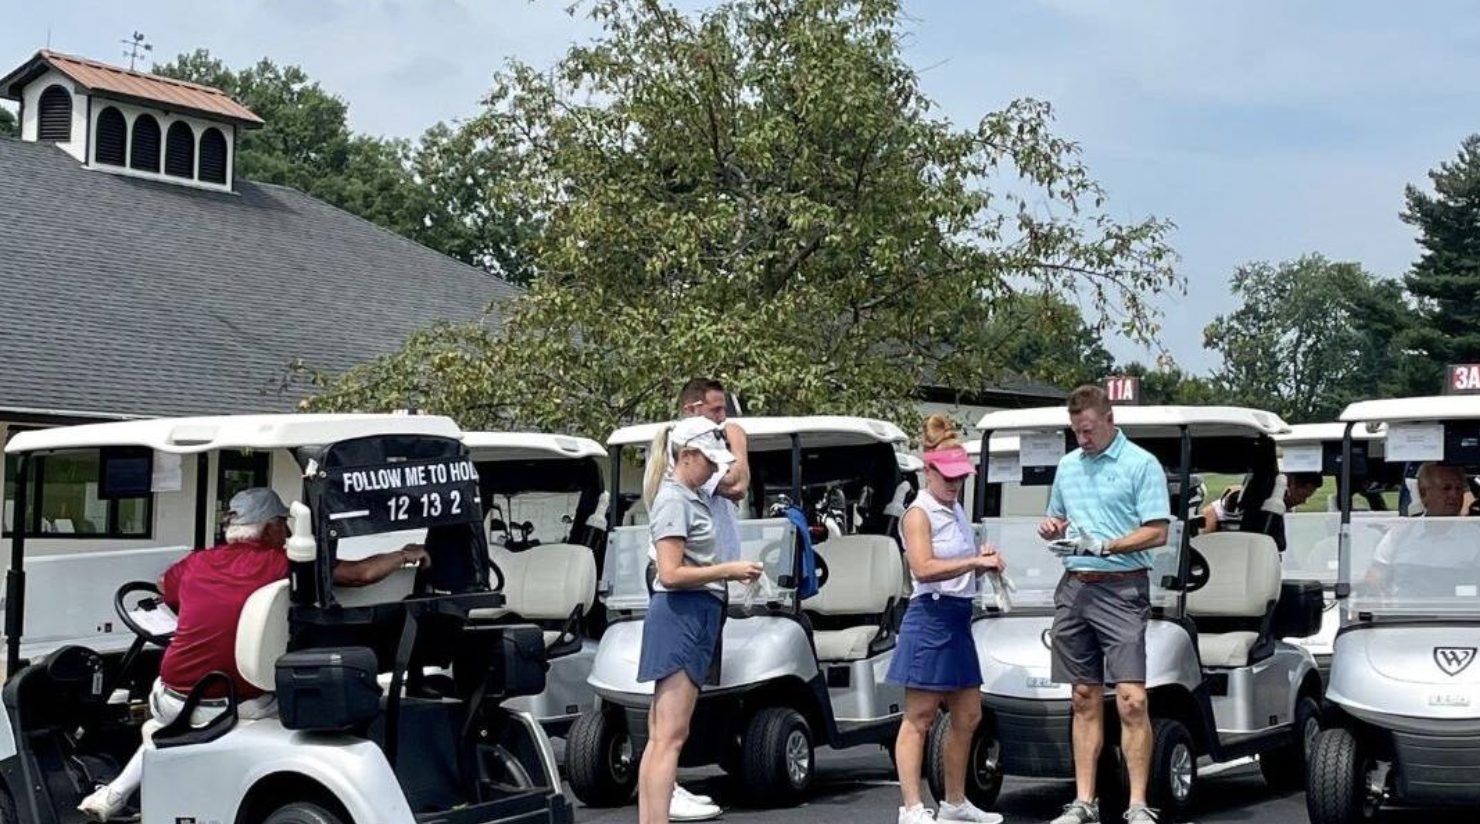 Blessings in a Backpack raises more than $40K at golf scramble in Louisville